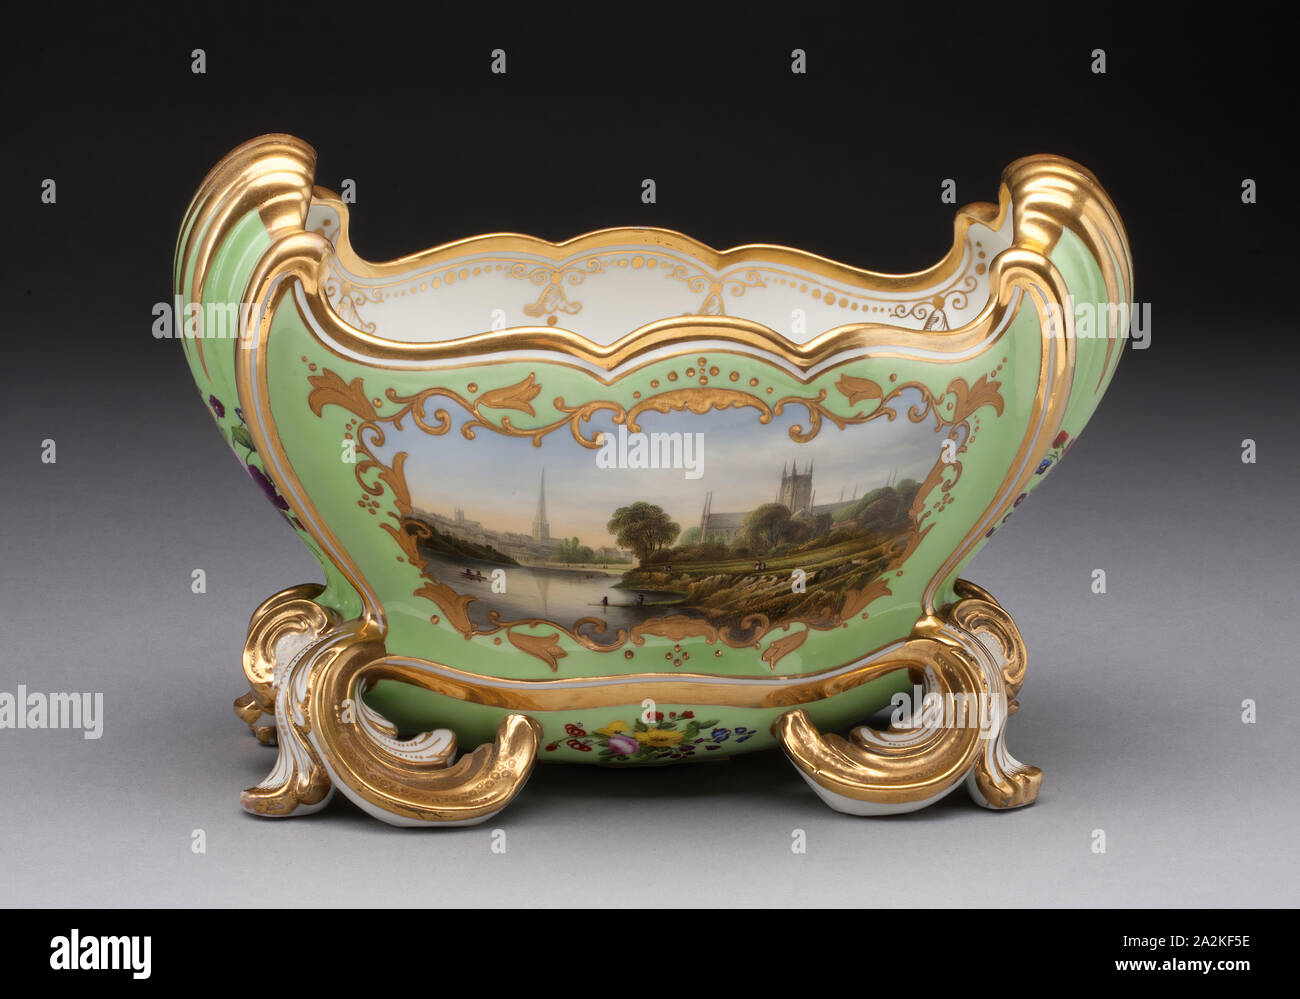 Flower Vase with view of Worcester, c. 1820, Worcester Porcelain Factory, Worcester, England, founded 1751, Worcester, Soft-paste porcelain with green ground, polychrome enamels and gilding, 15.9 x 23.5 cm (6 1/4 x 9 1/4 in Stock Photo